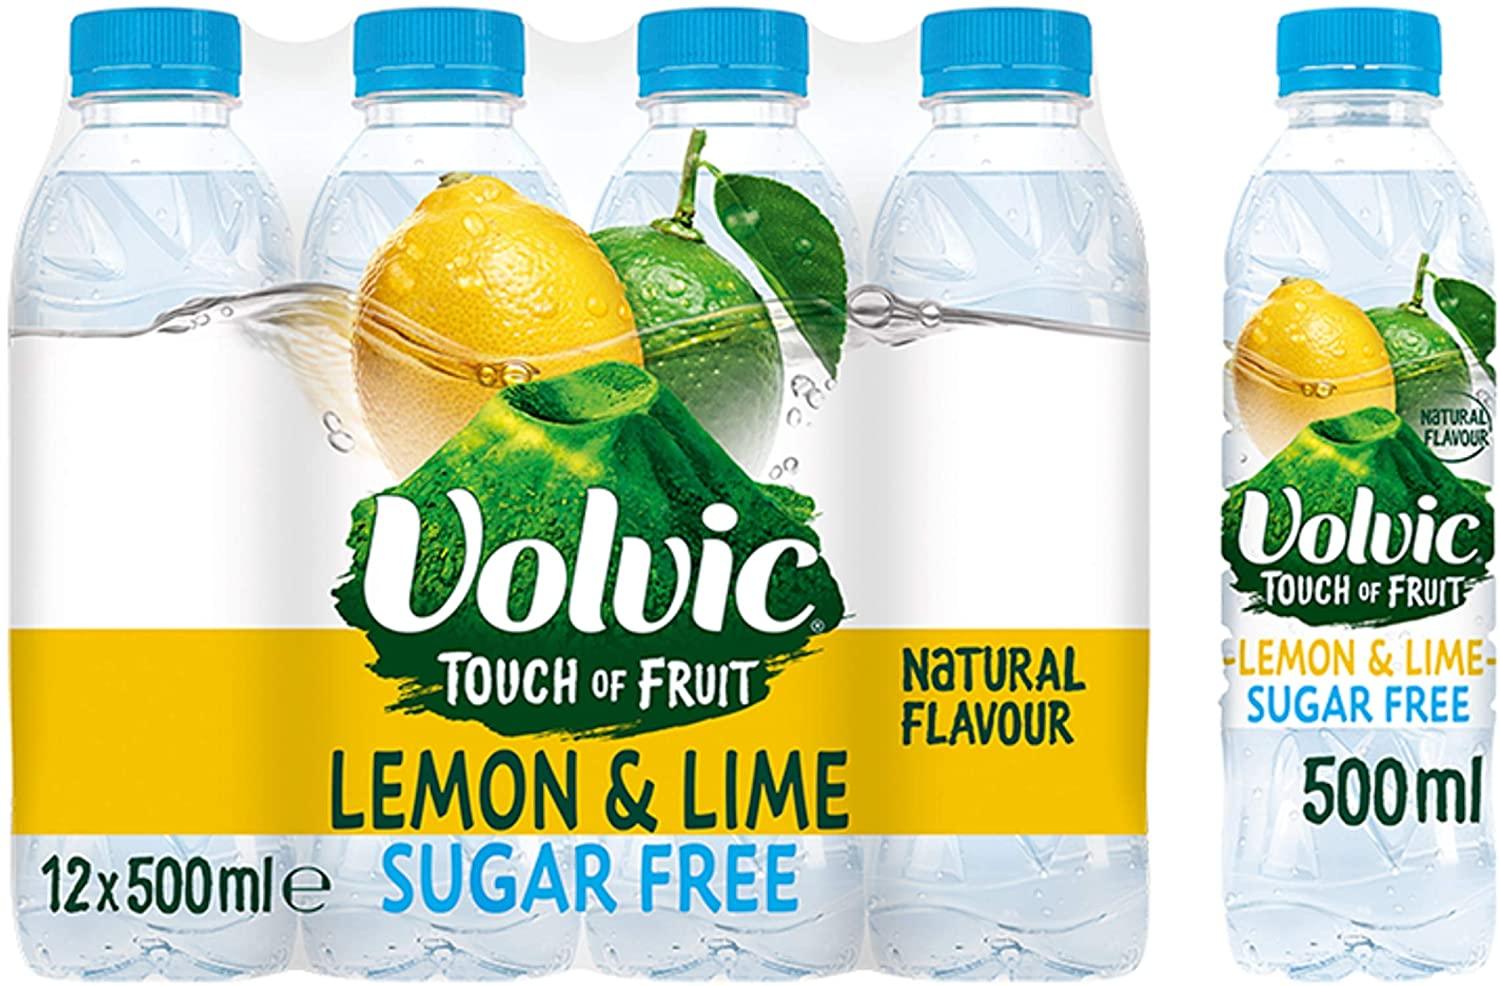 Volvic Touch of Fruit Sugar Free Lemon & Lime Flavoured Water, 12 x 500 ml - Vending Superstore